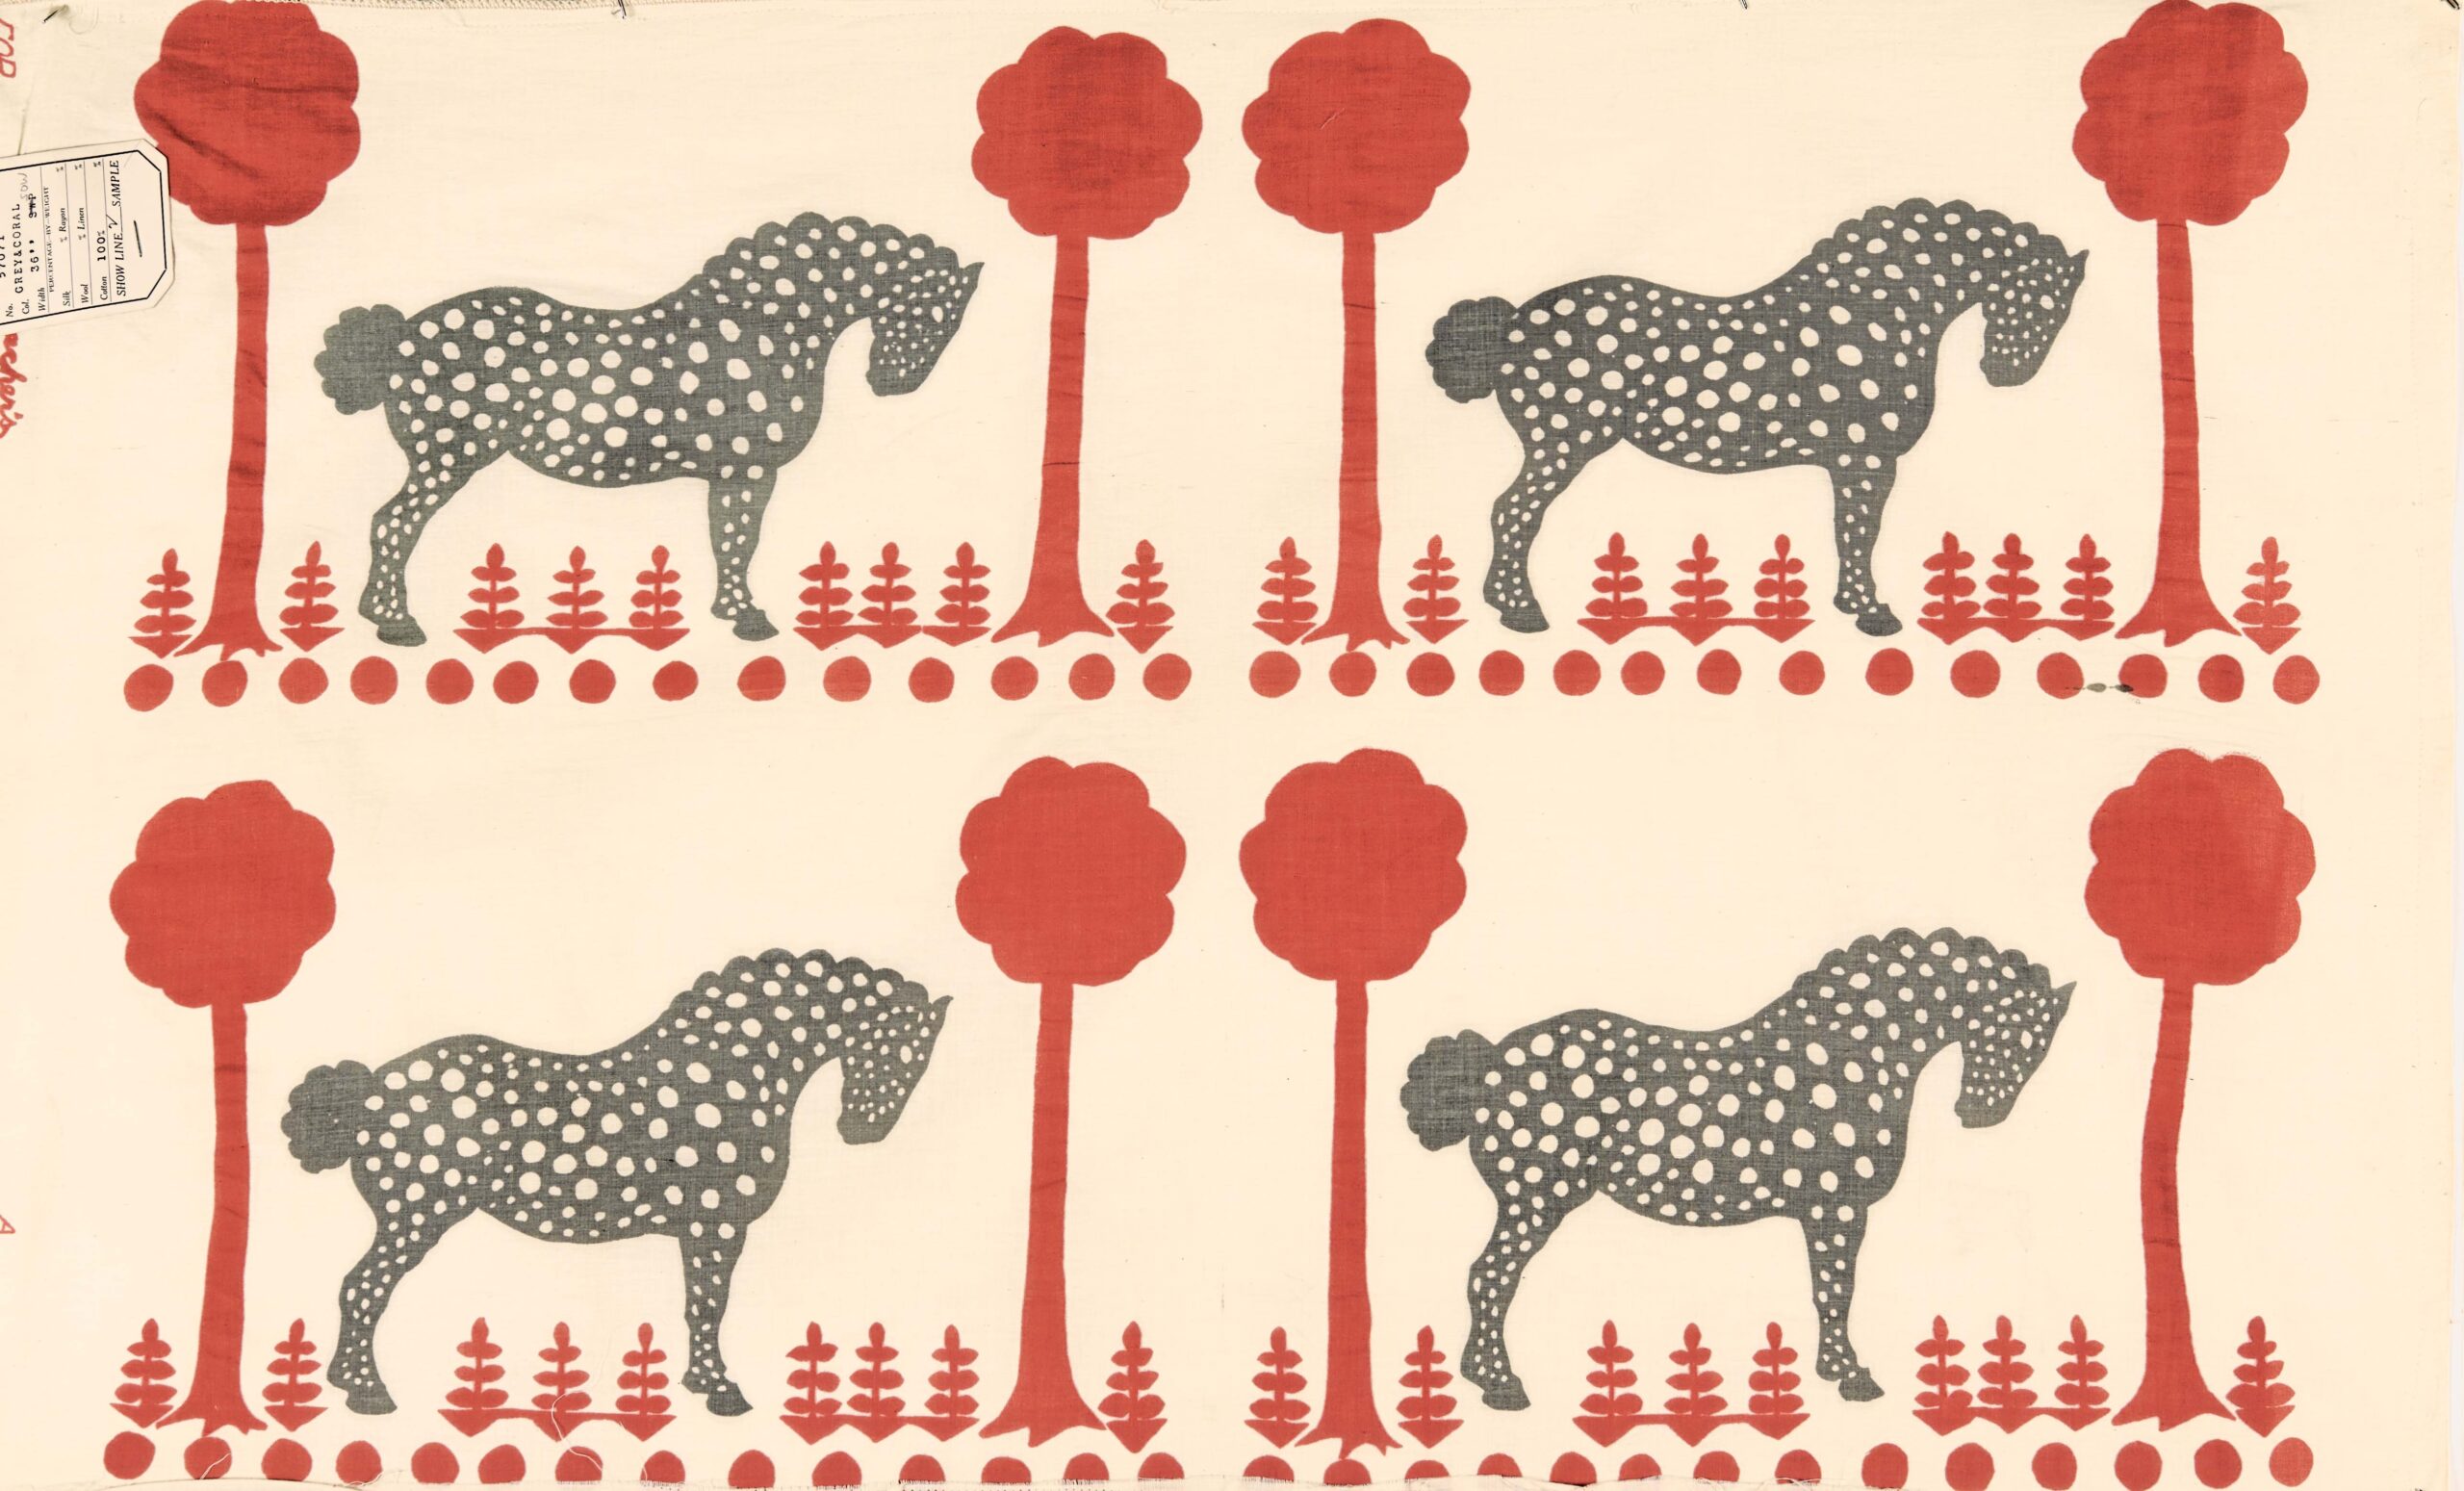 An archival fabric sample of Polka Dot Pony, a Folly Cove design from the Schumacher archive.